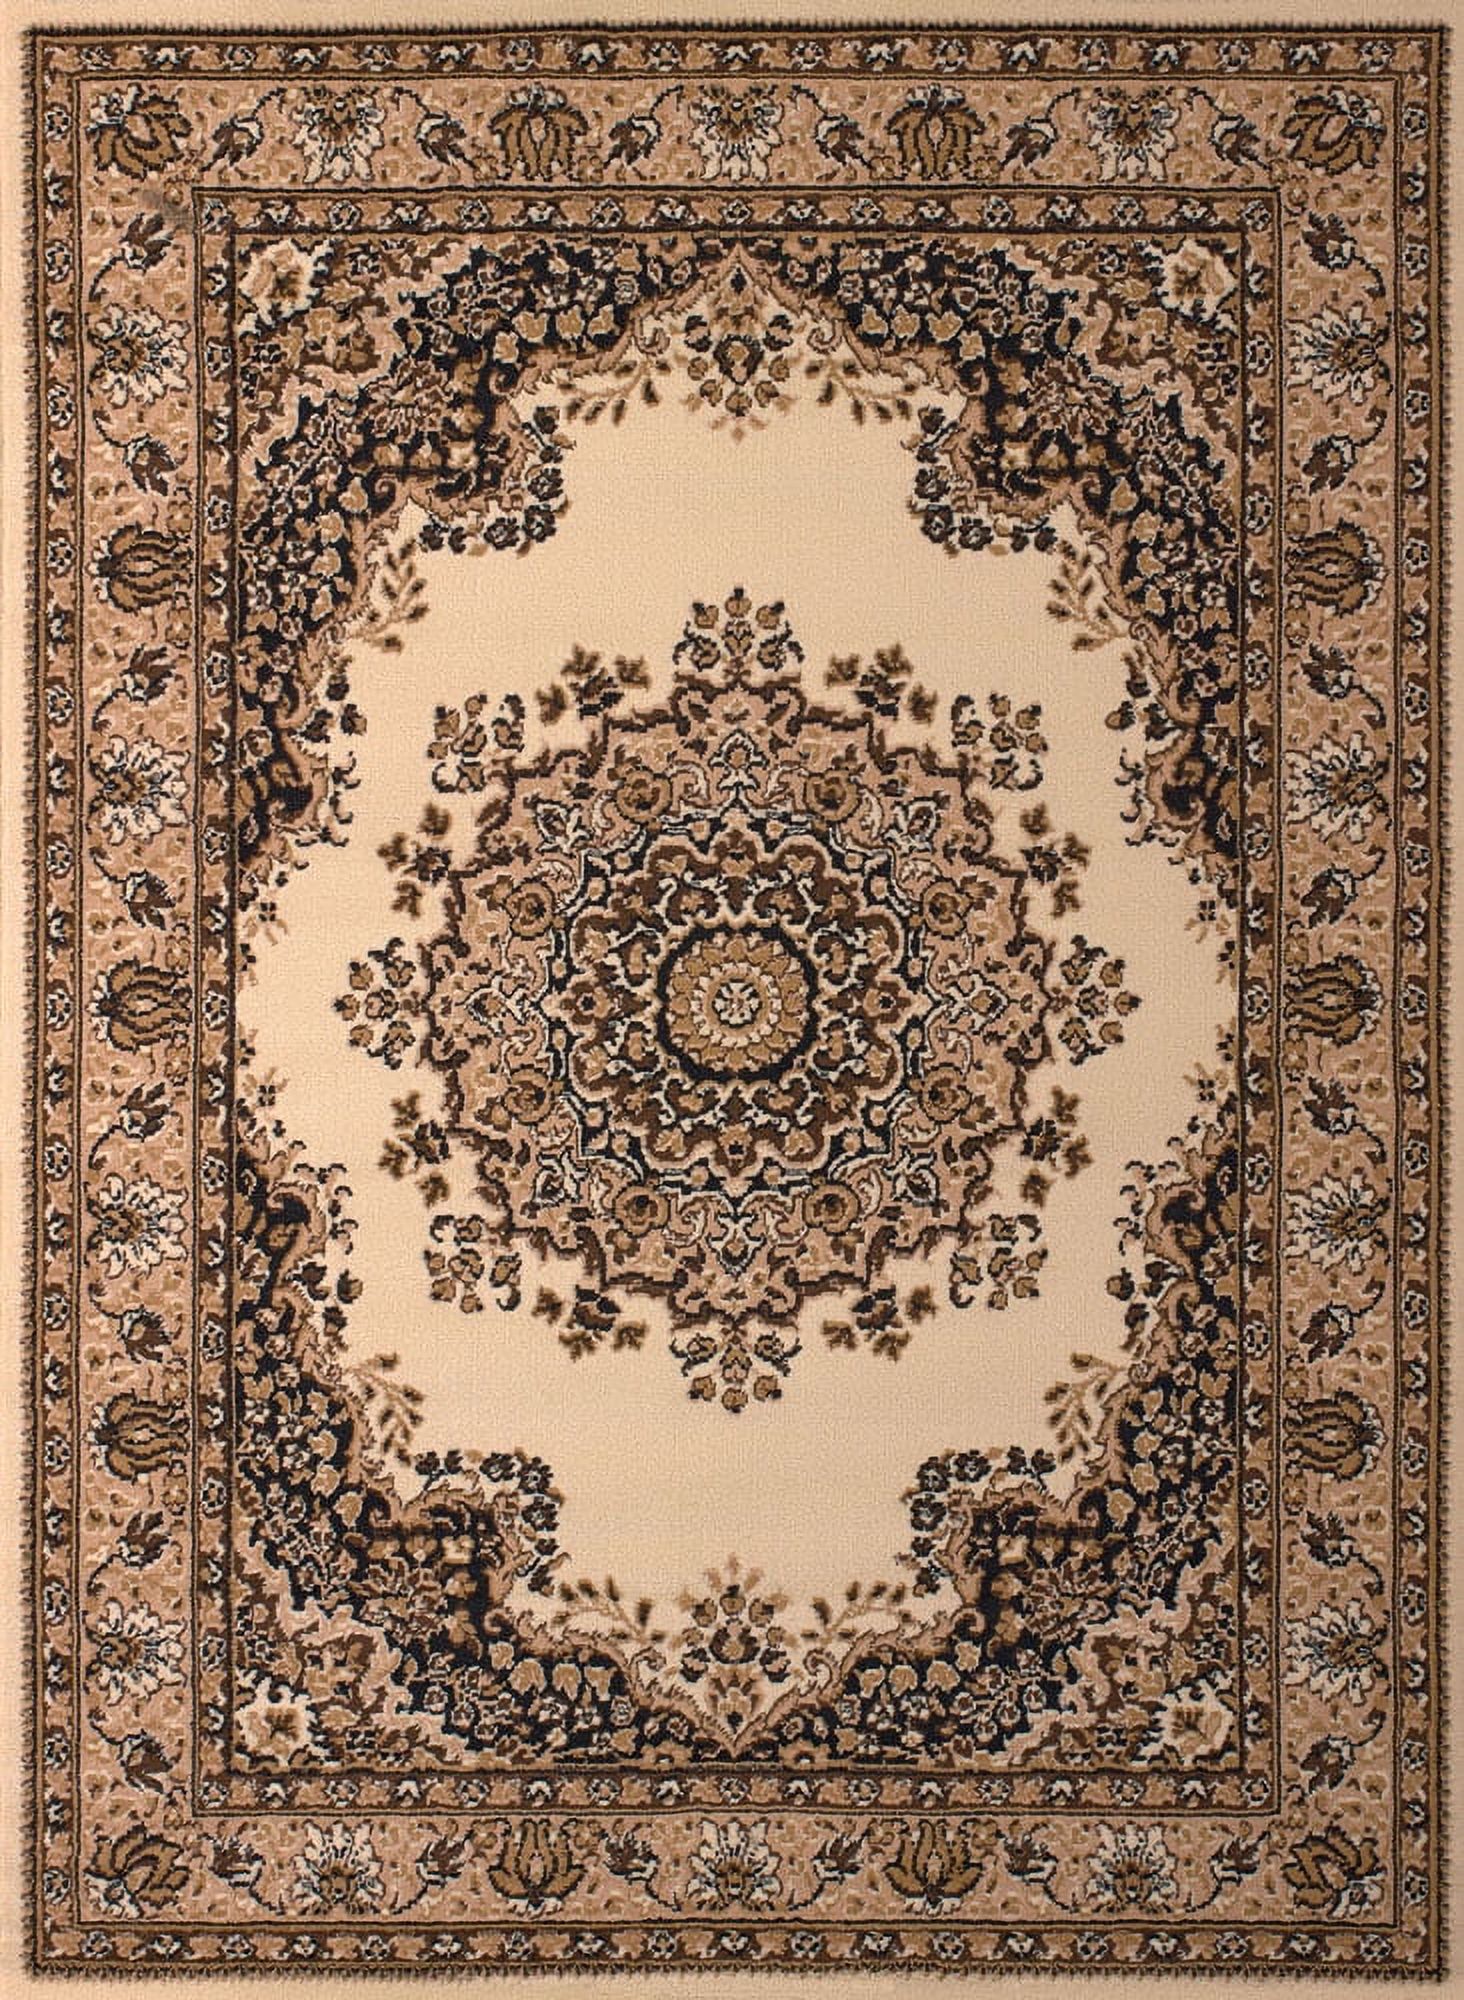 Designer Home Soft Traditional Oriental Area Rug with Center Medallion - Actual Size: 5' 3" x 7' 2" Rectangle (Ivory) - image 2 of 5